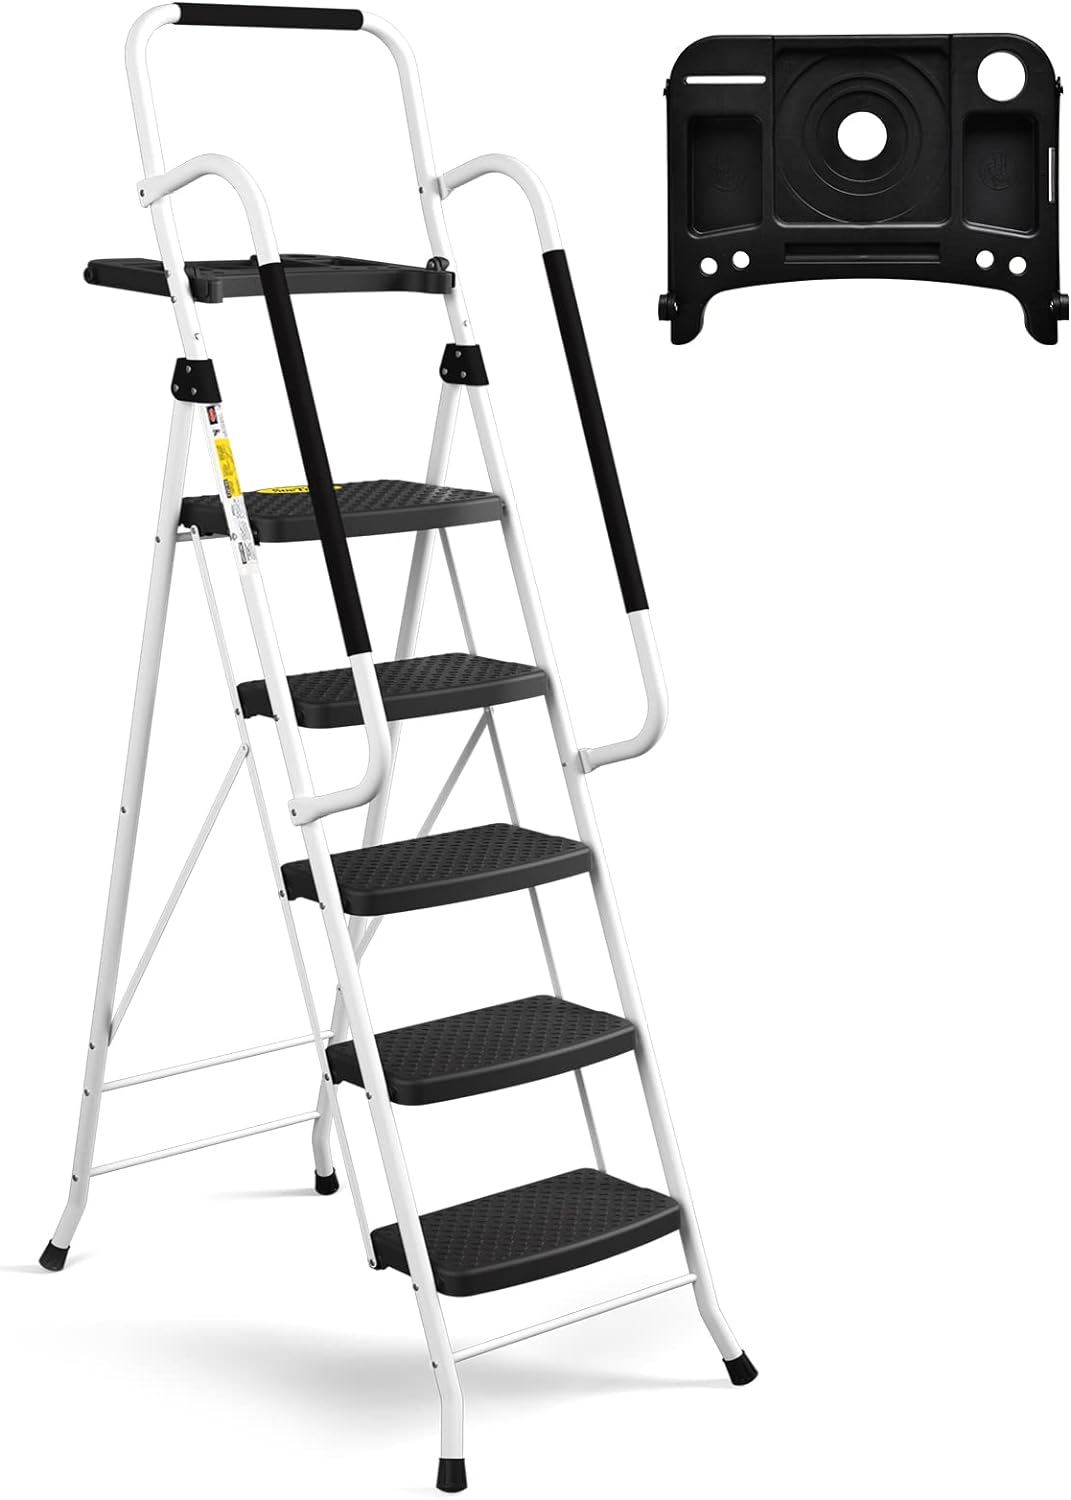 Five-step tray ladder